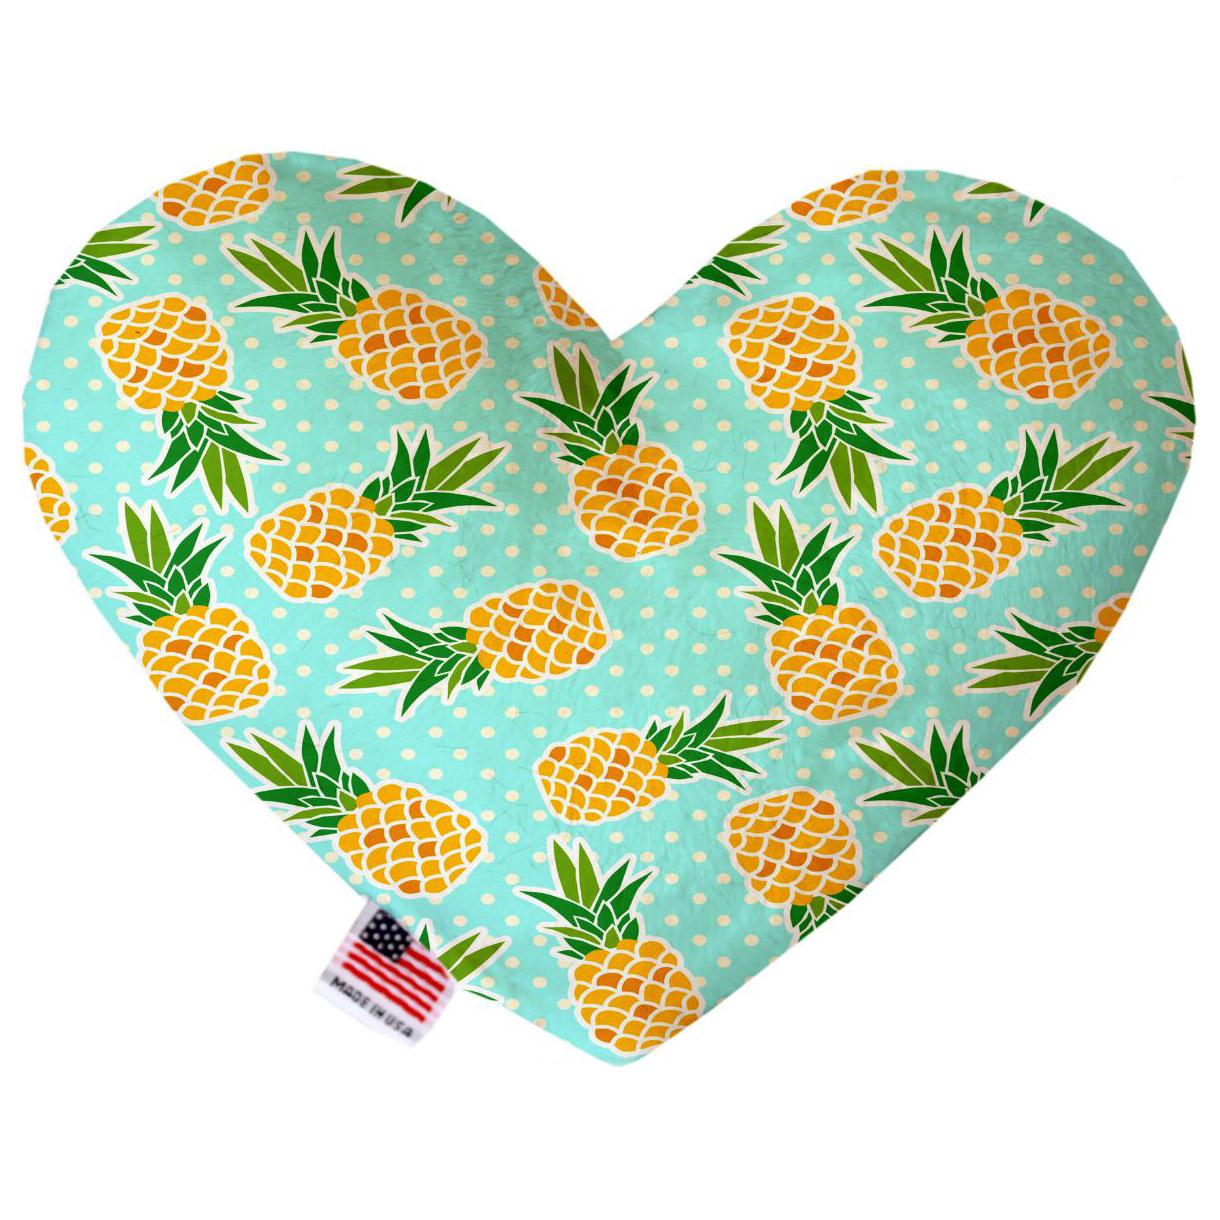 Heart Dog Toy - Pineapples and Polka Dots